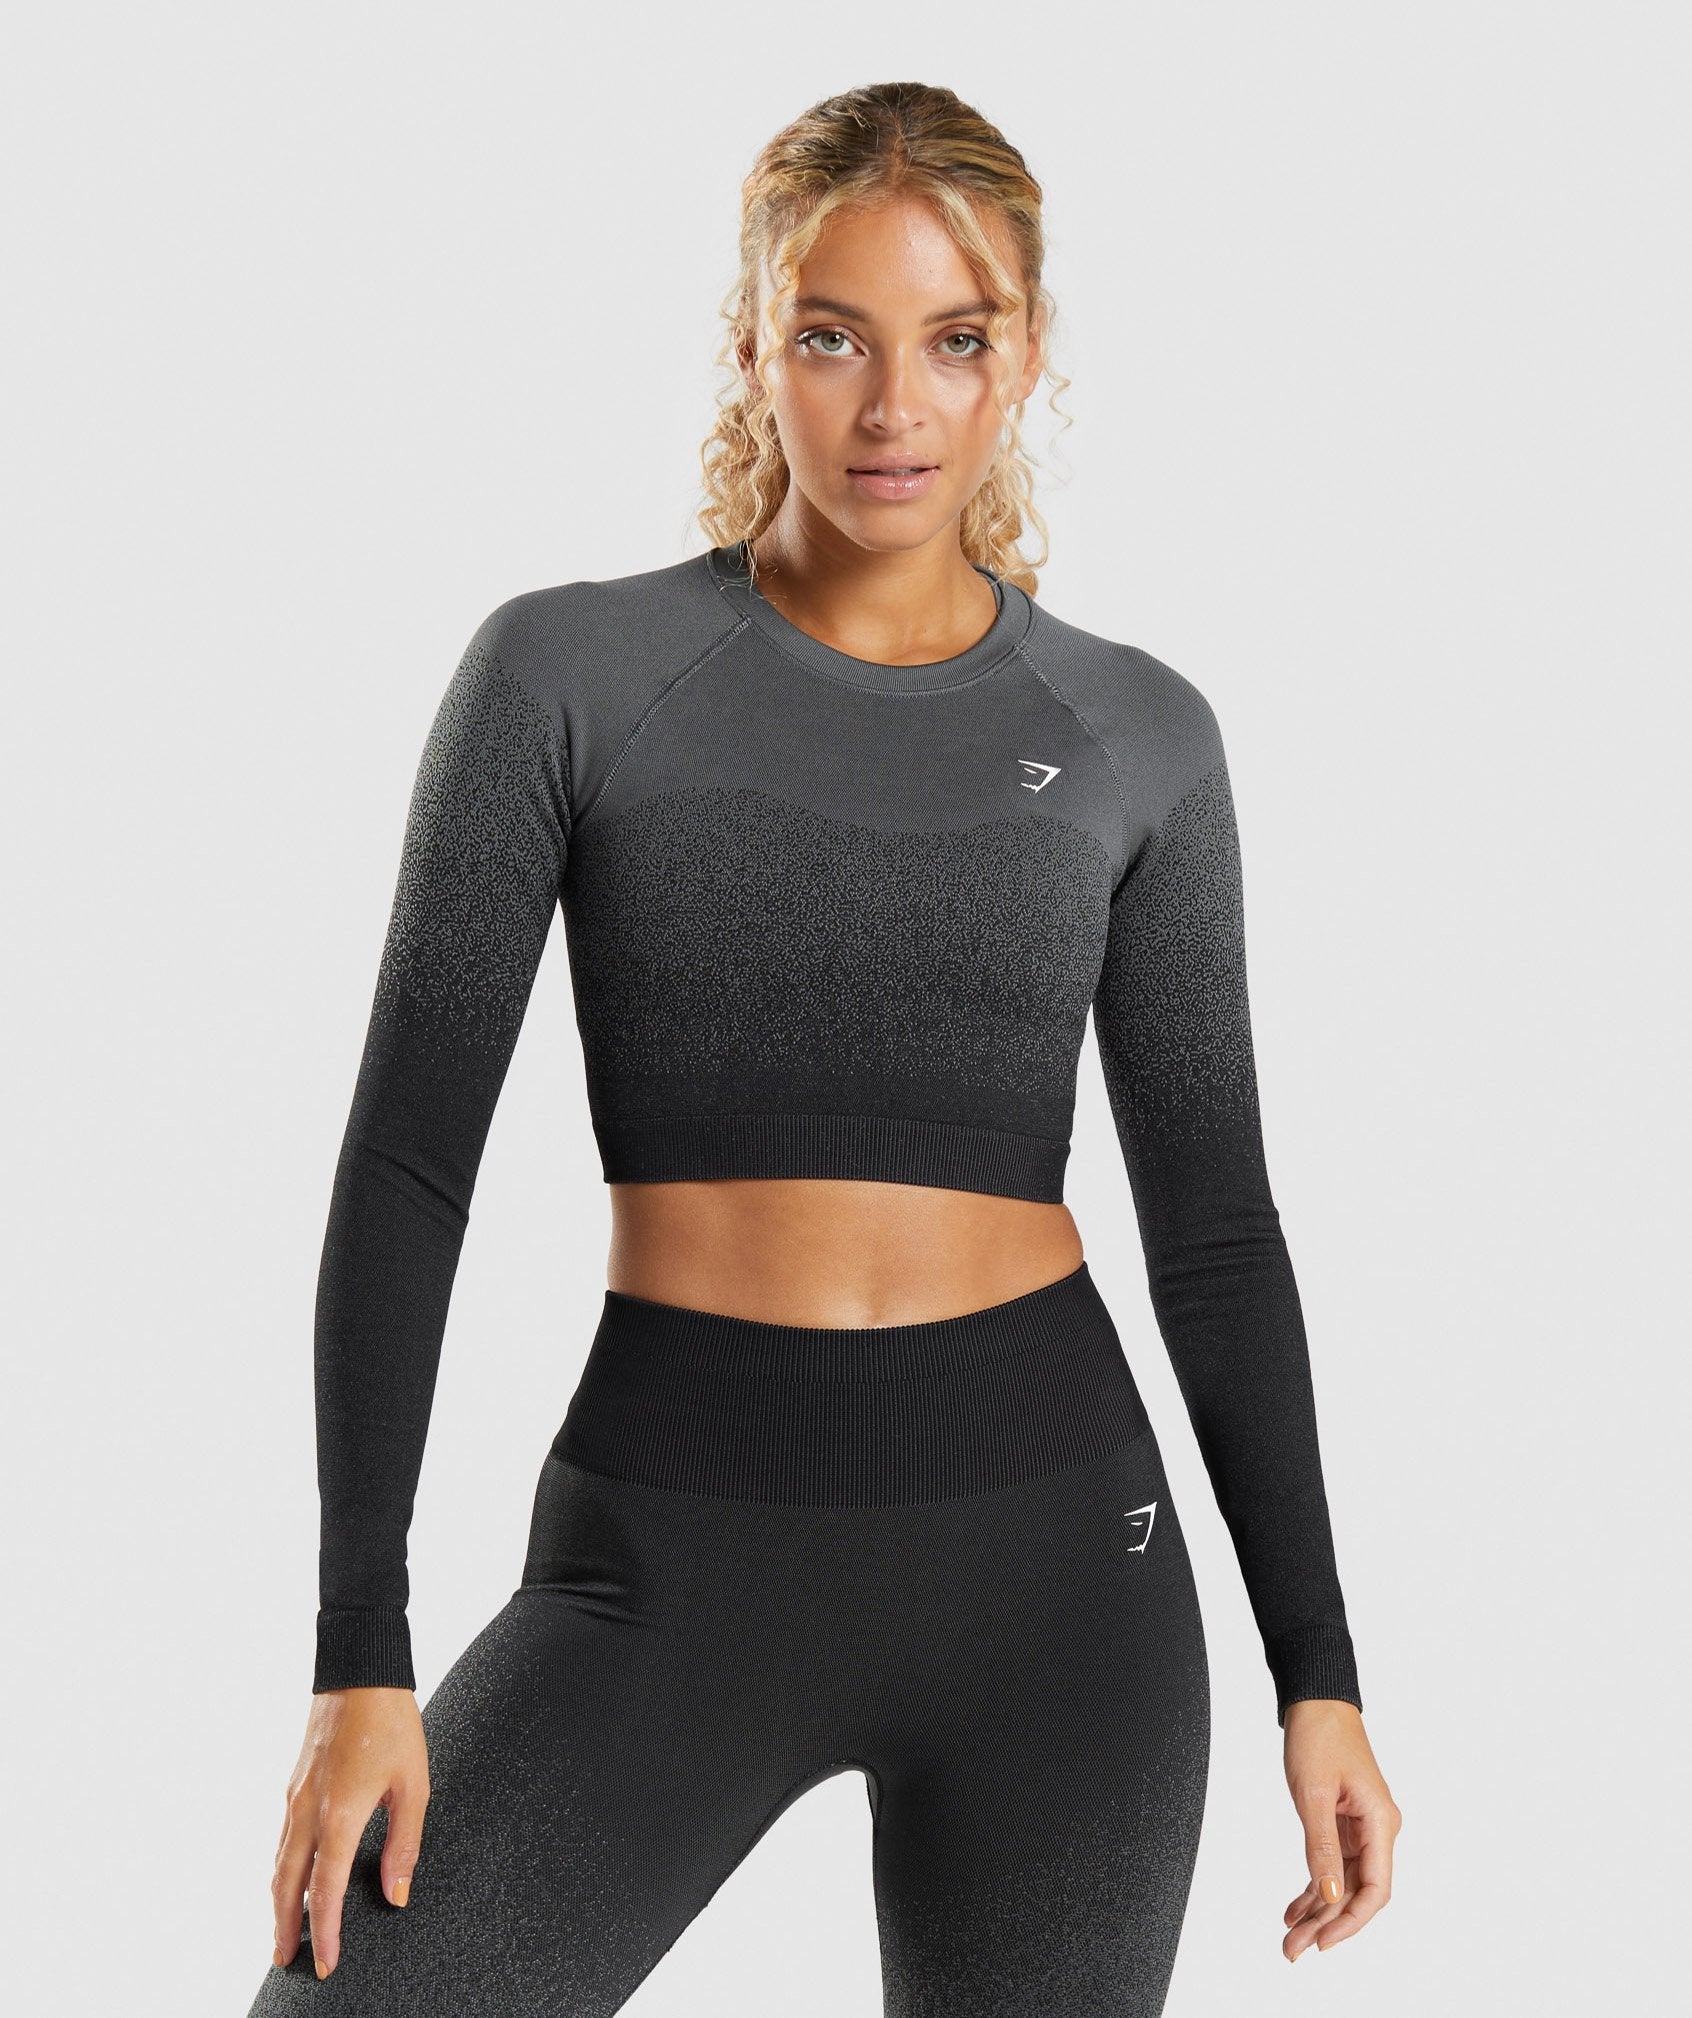 Adapt Ombre Seamless Long Sleeve Crop Top in Black/Grey - view 1